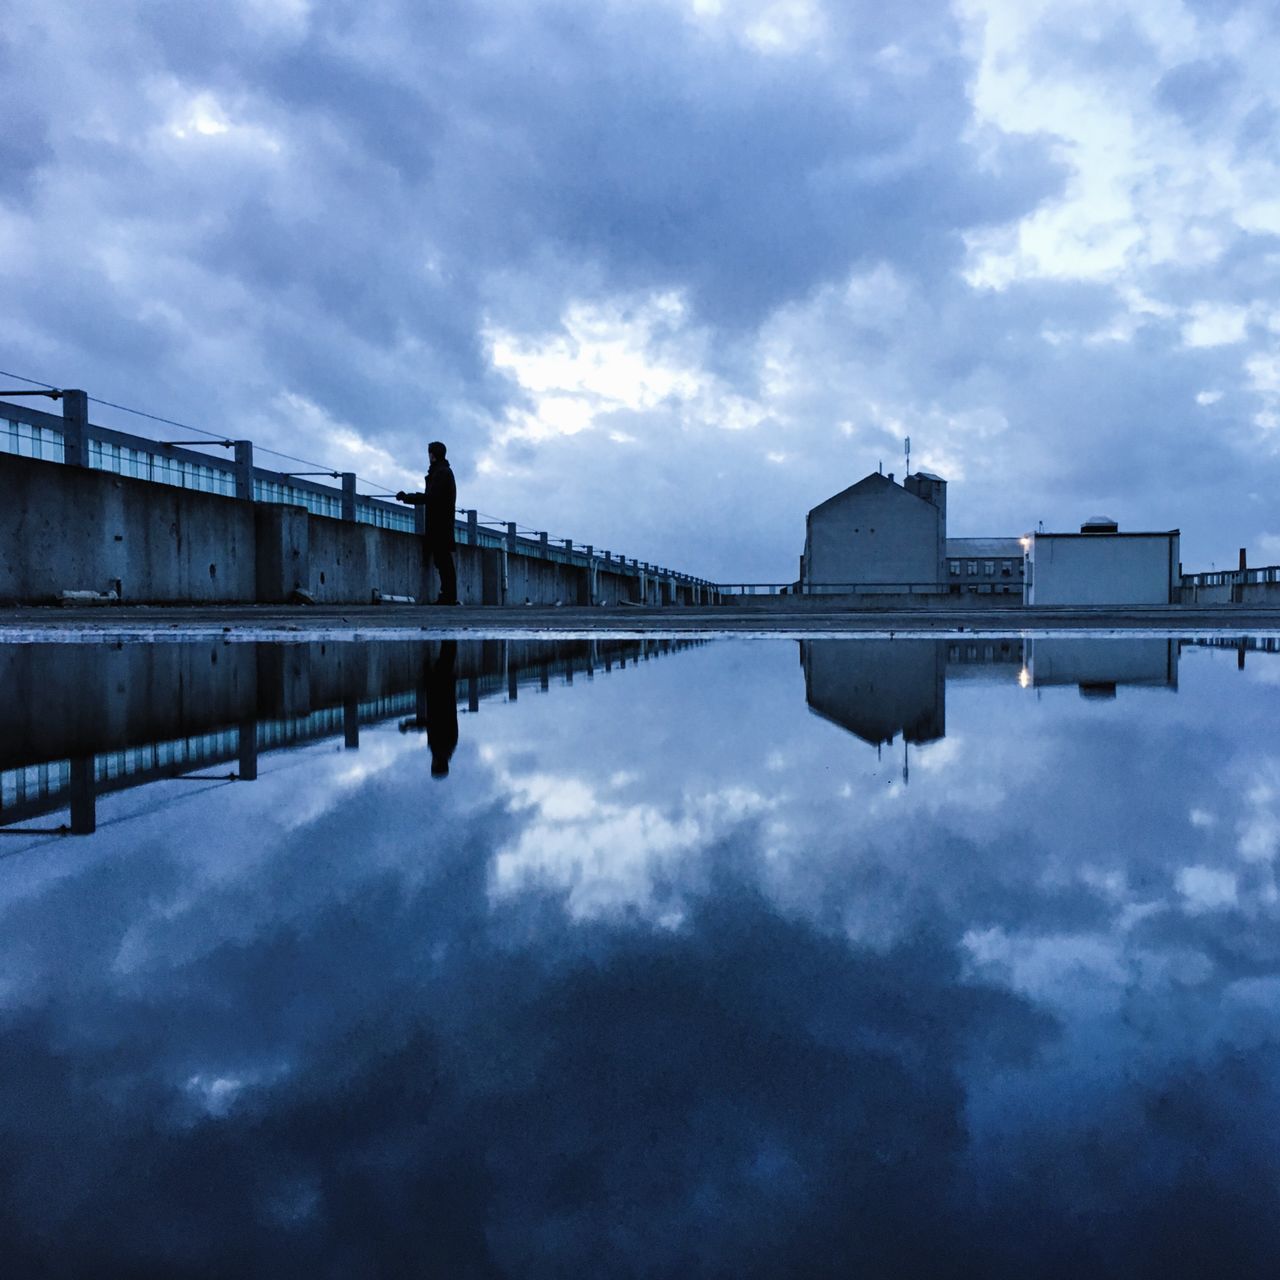 sky, architecture, cloud - sky, built structure, building exterior, cloudy, reflection, water, cloud, weather, overcast, waterfront, city, outdoors, day, nature, building, standing water, no people, lake